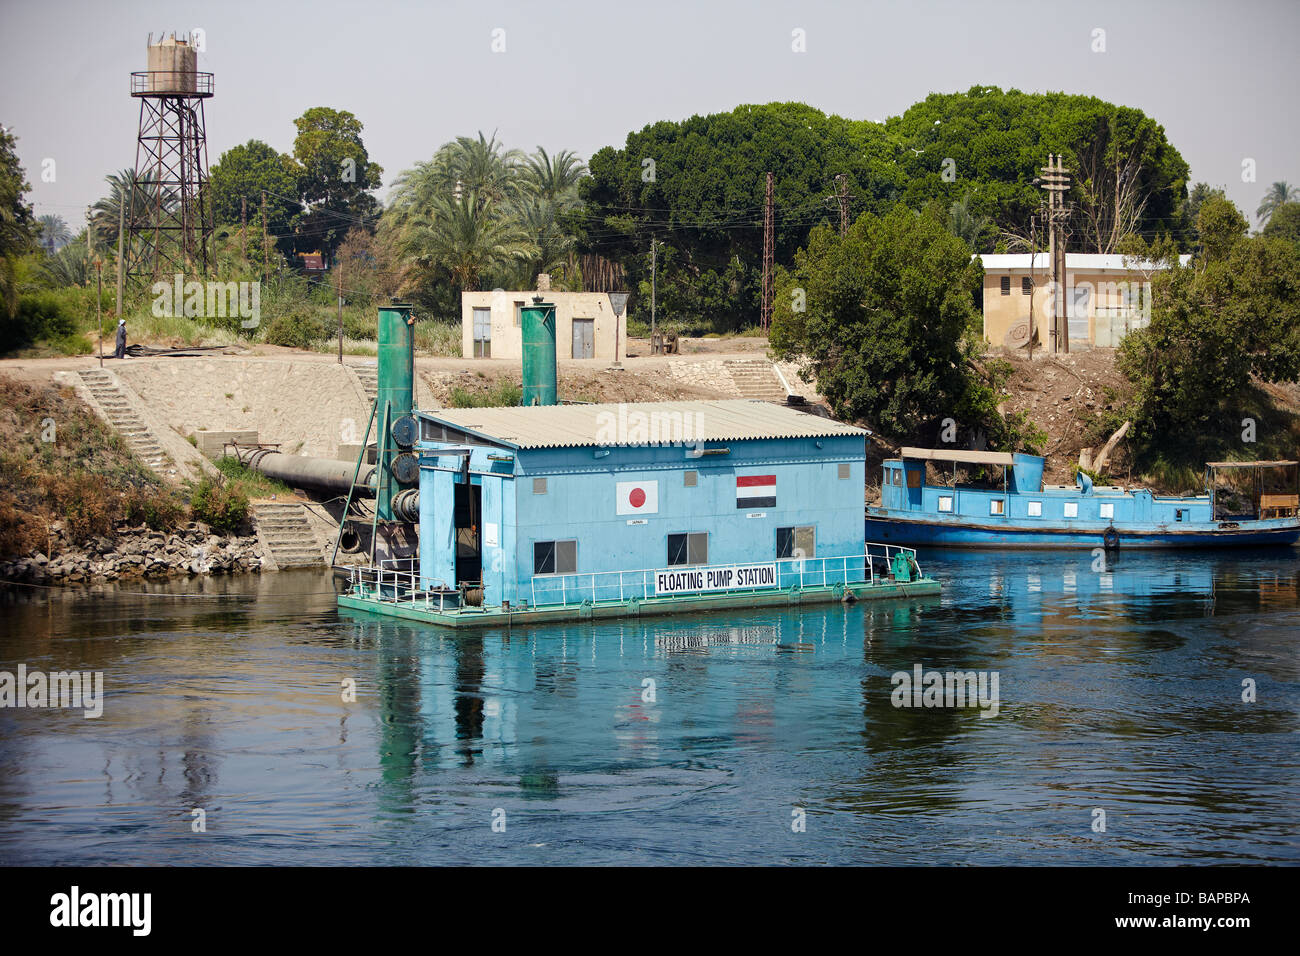 Floating Pumping Station on the River Nile, Egypt Stock Photo